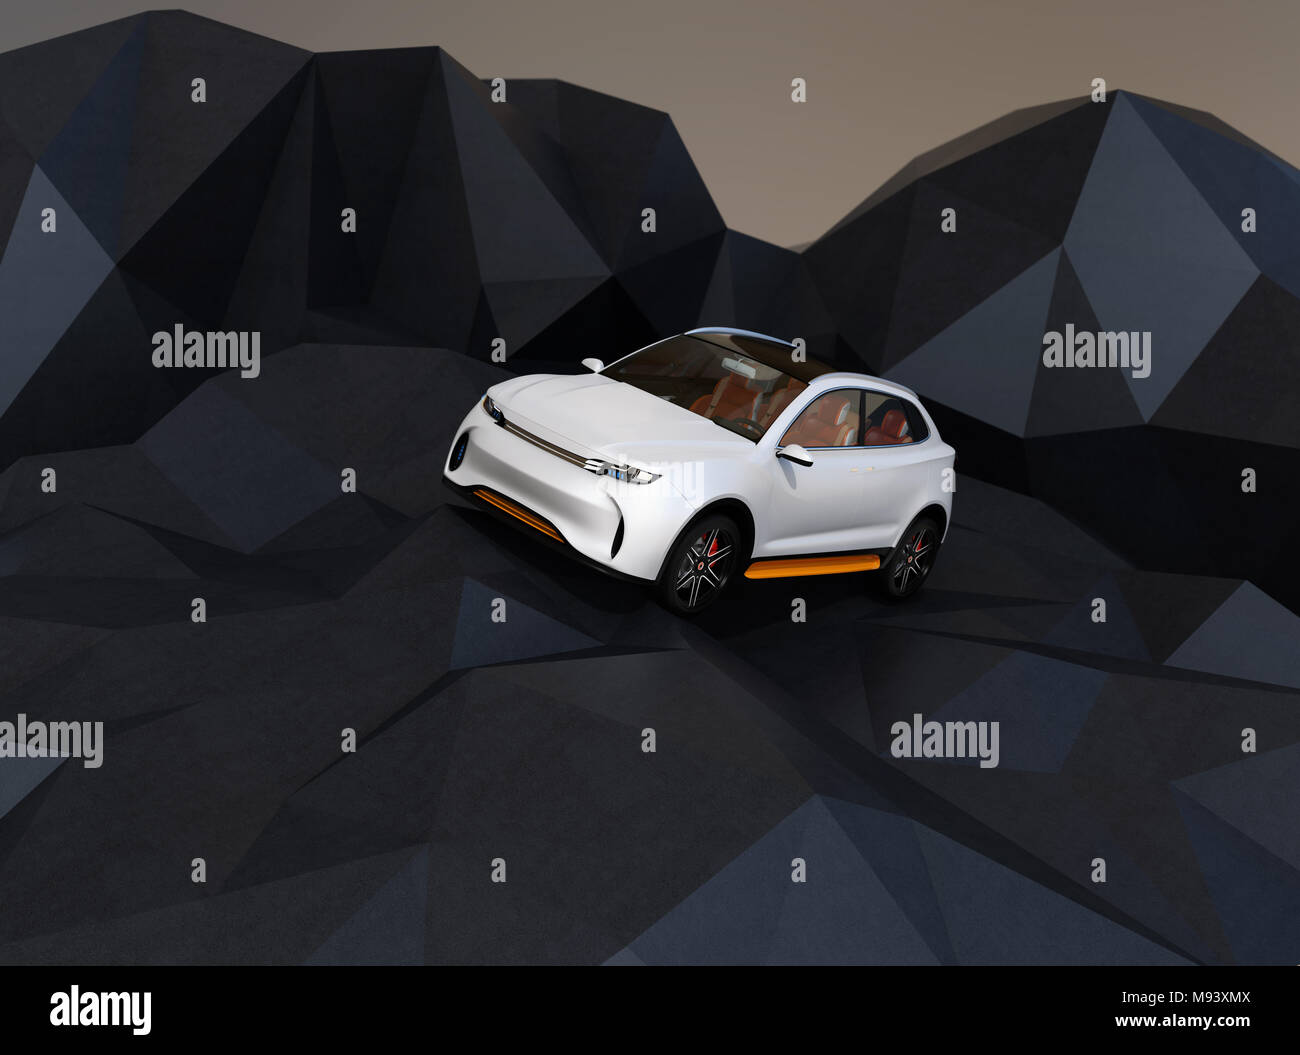 White electric SUV on geometric hard surface ground. 3D rendering image. Stock Photo